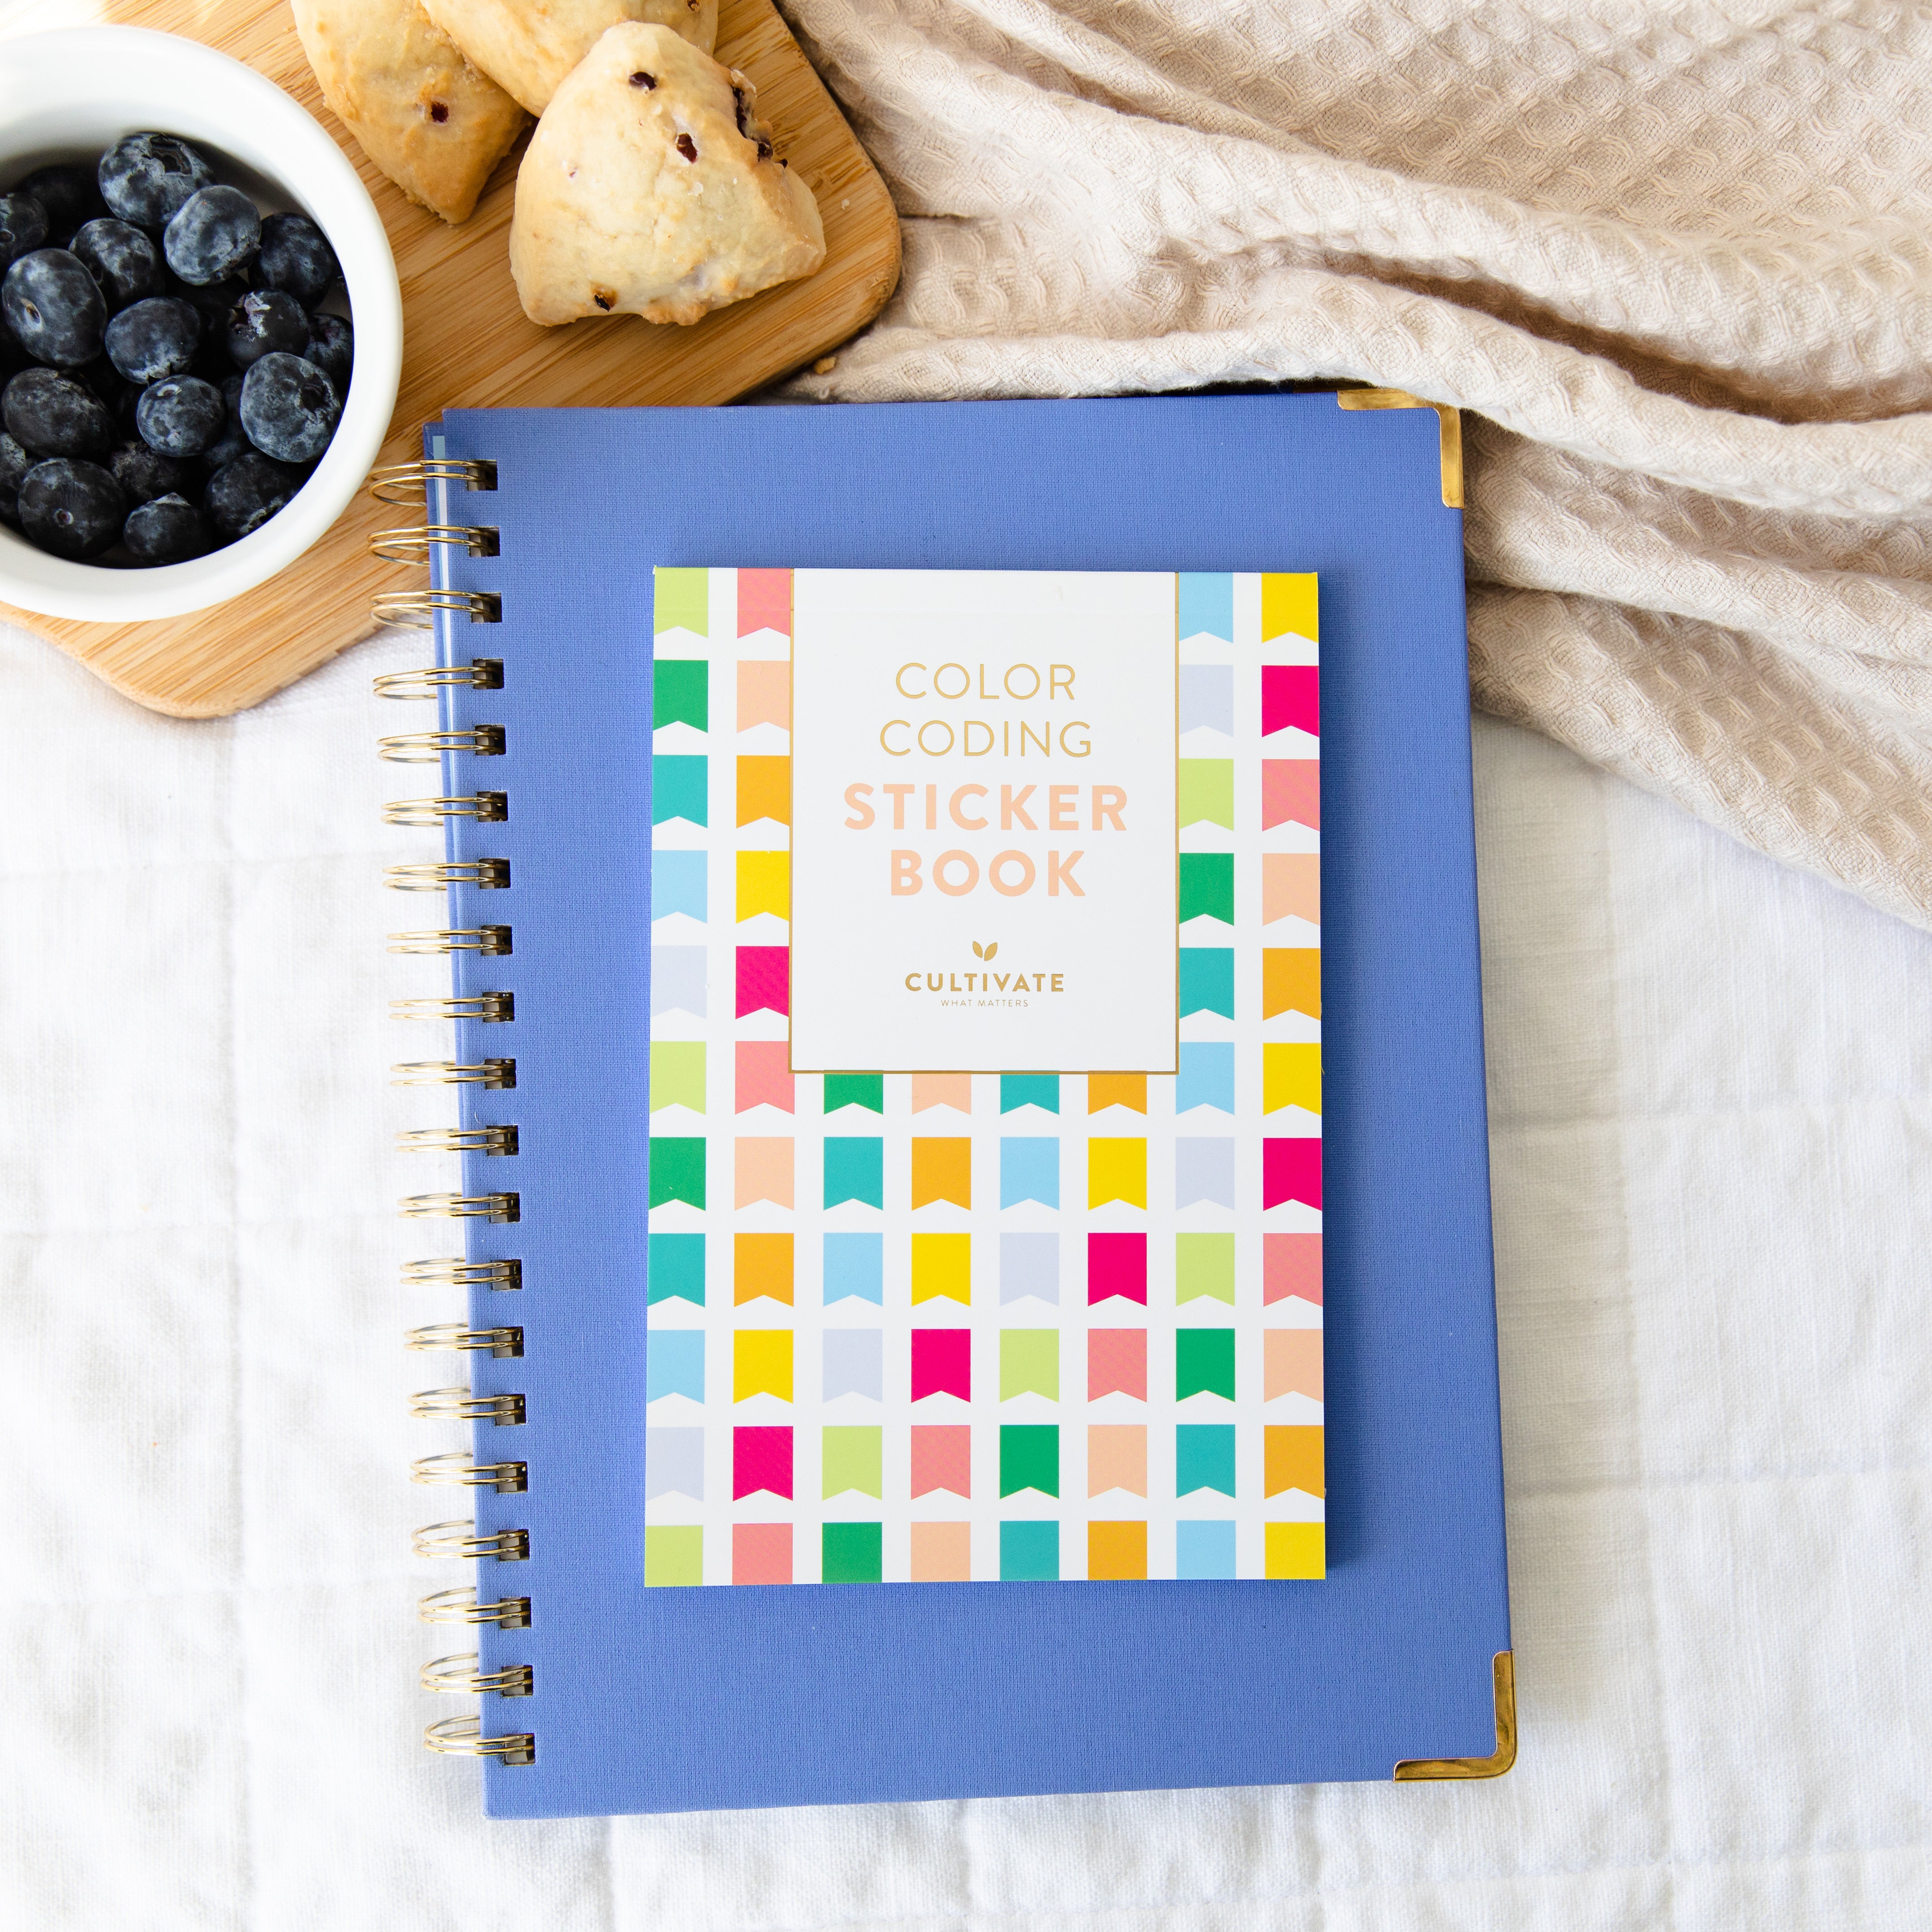 Favorite color coding planner supplies under $5 – All About Planners